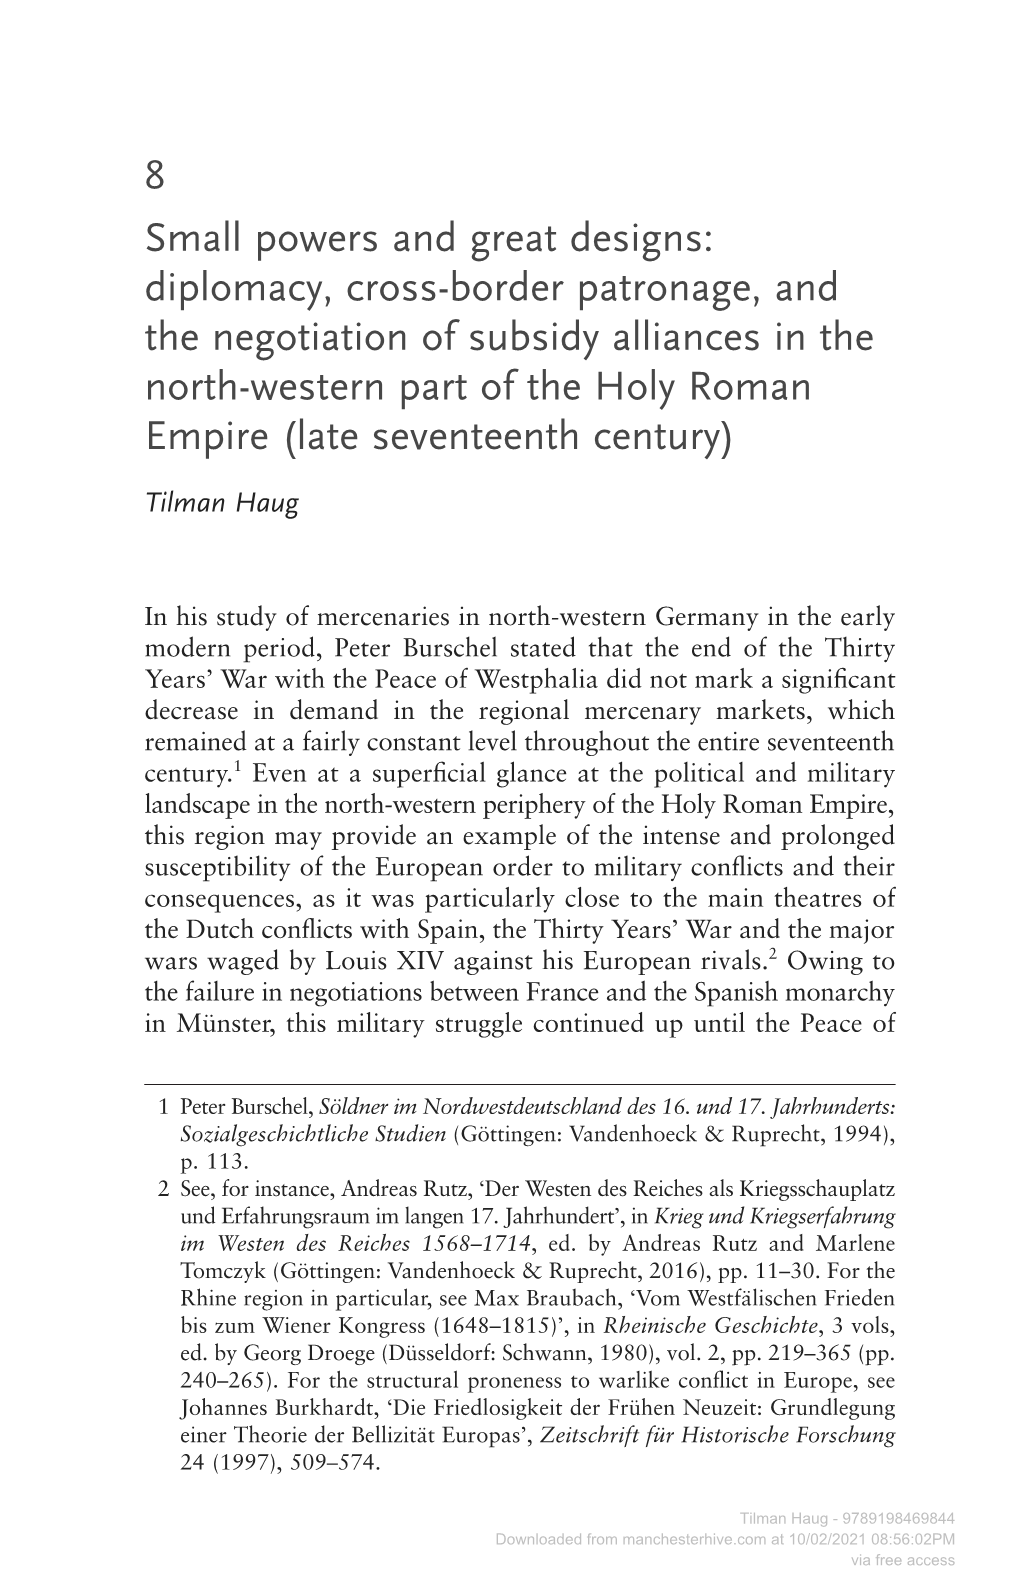 Subsidies, Diplomacy, and State Formation